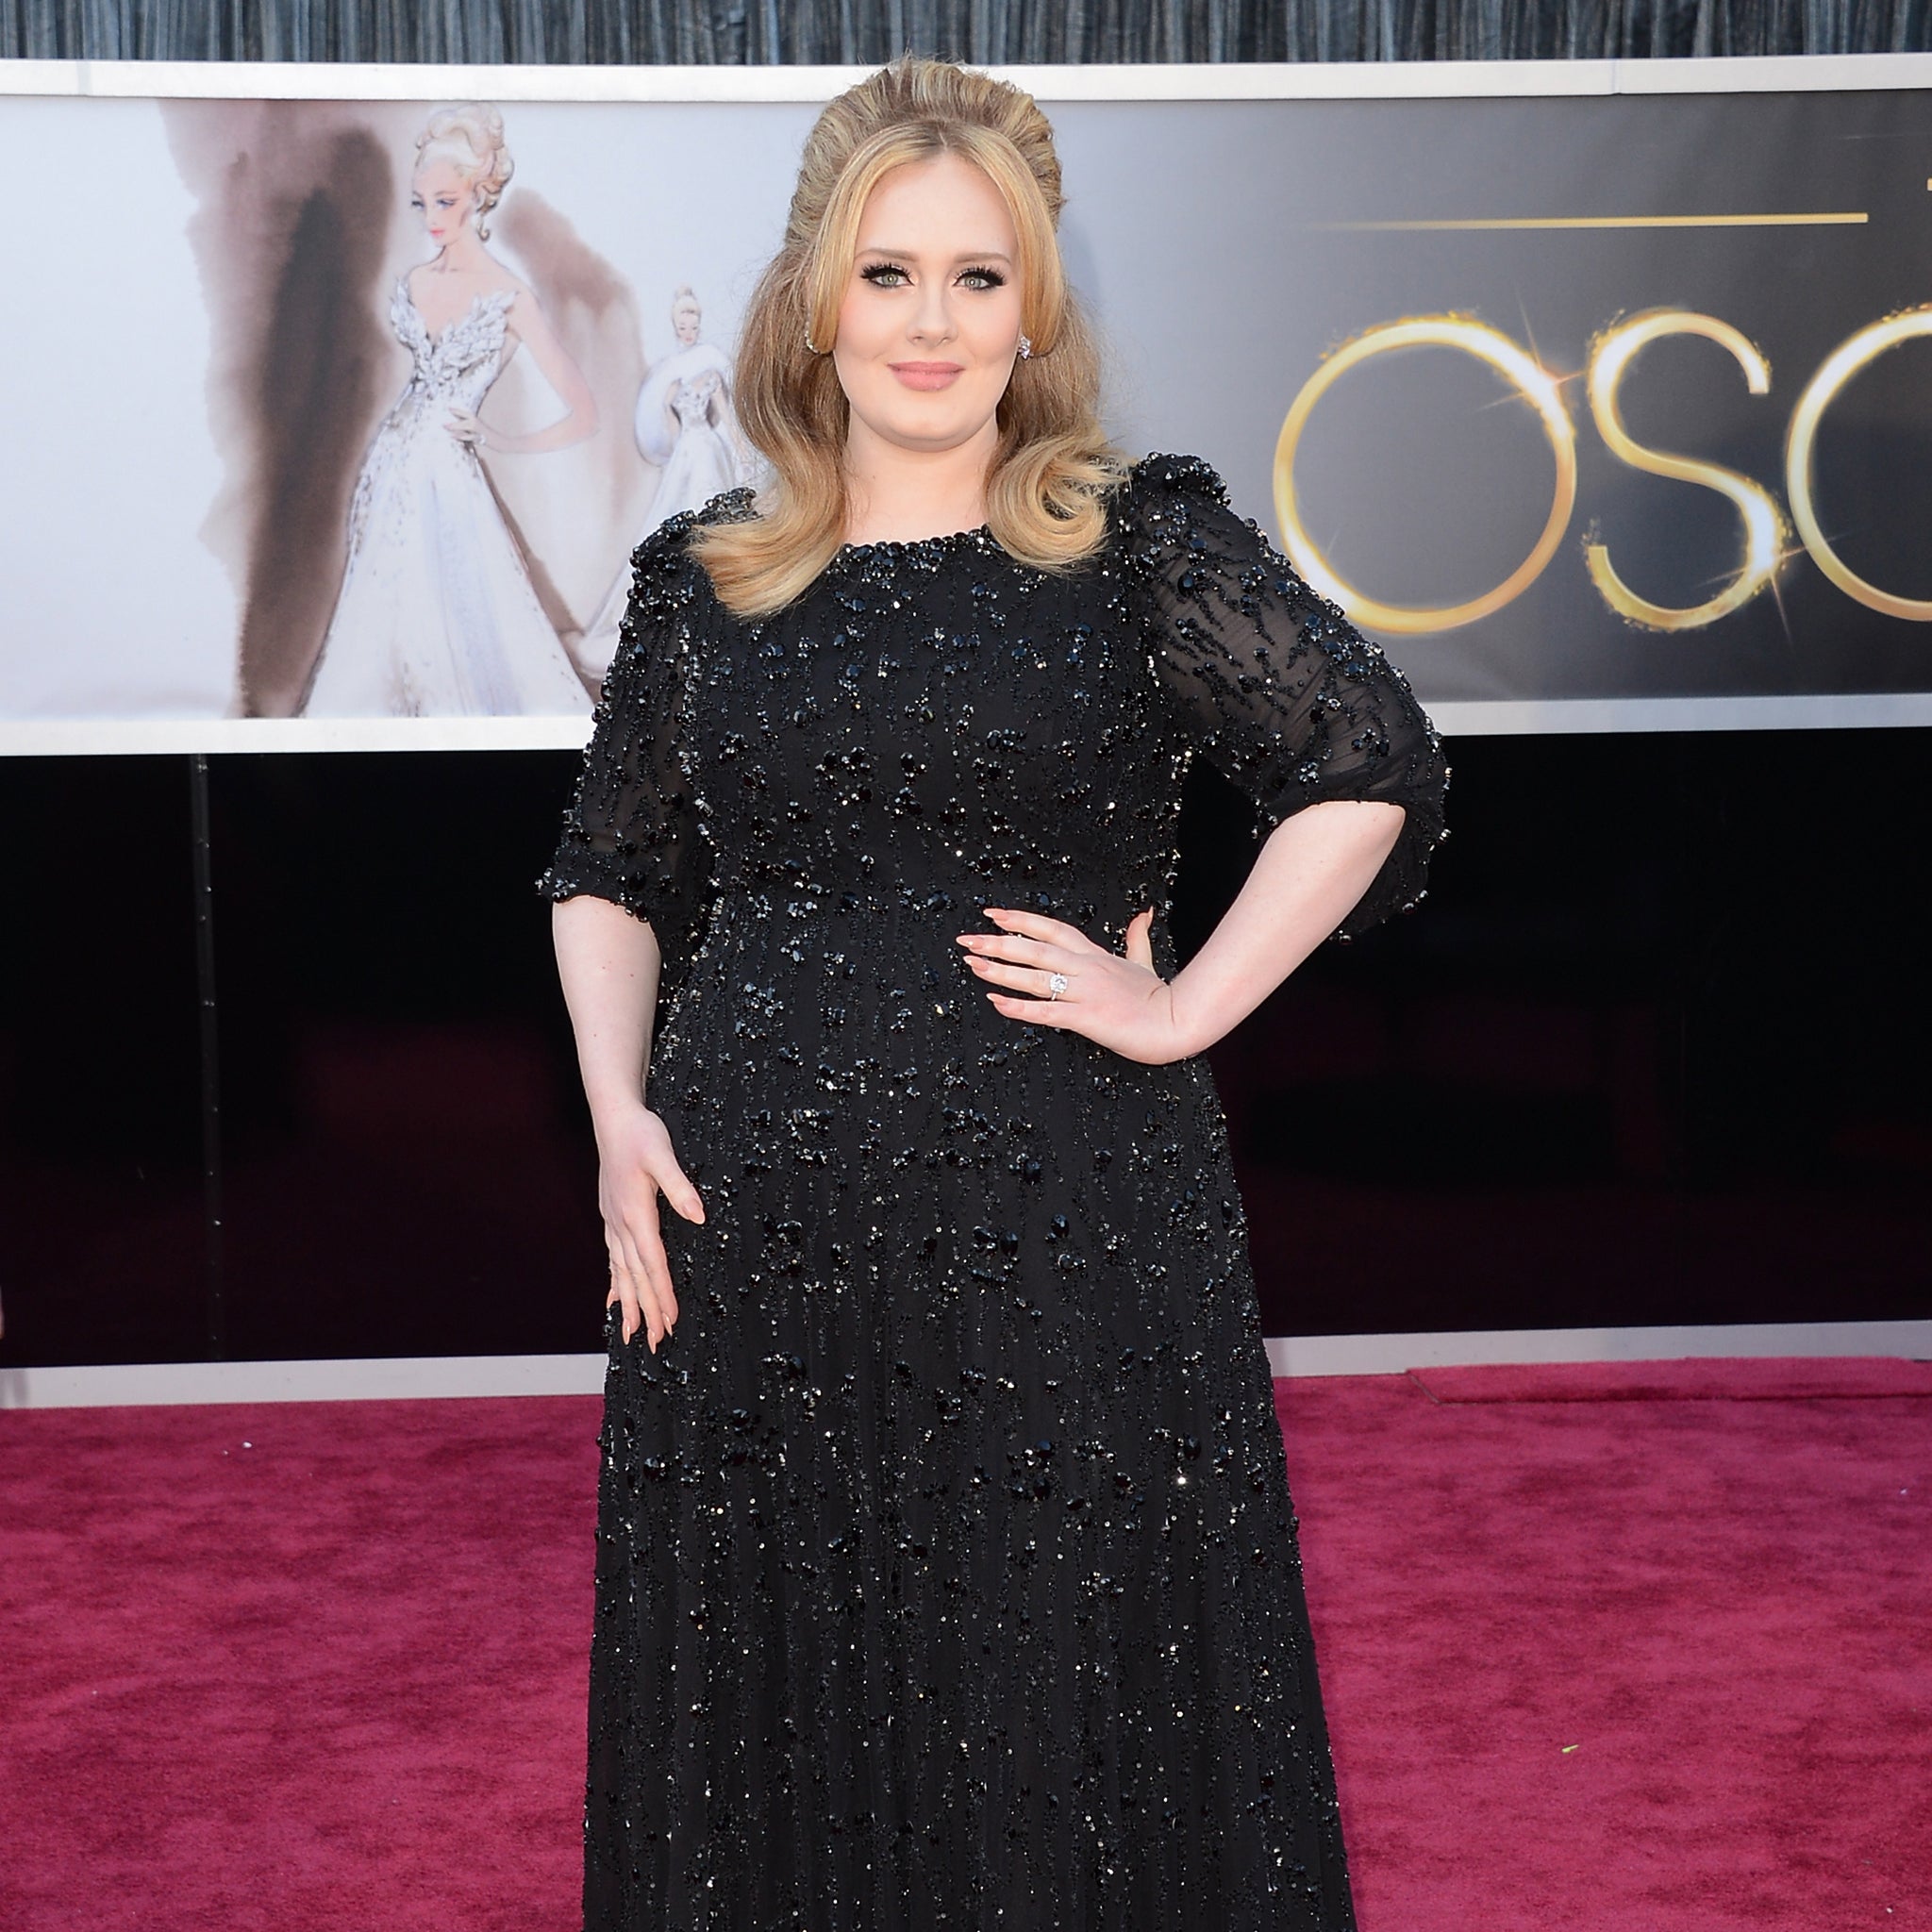 Singer Adele arrives at the Oscars at Hollywood & Highland Center on February 24, 2013 in Hollywood, California.